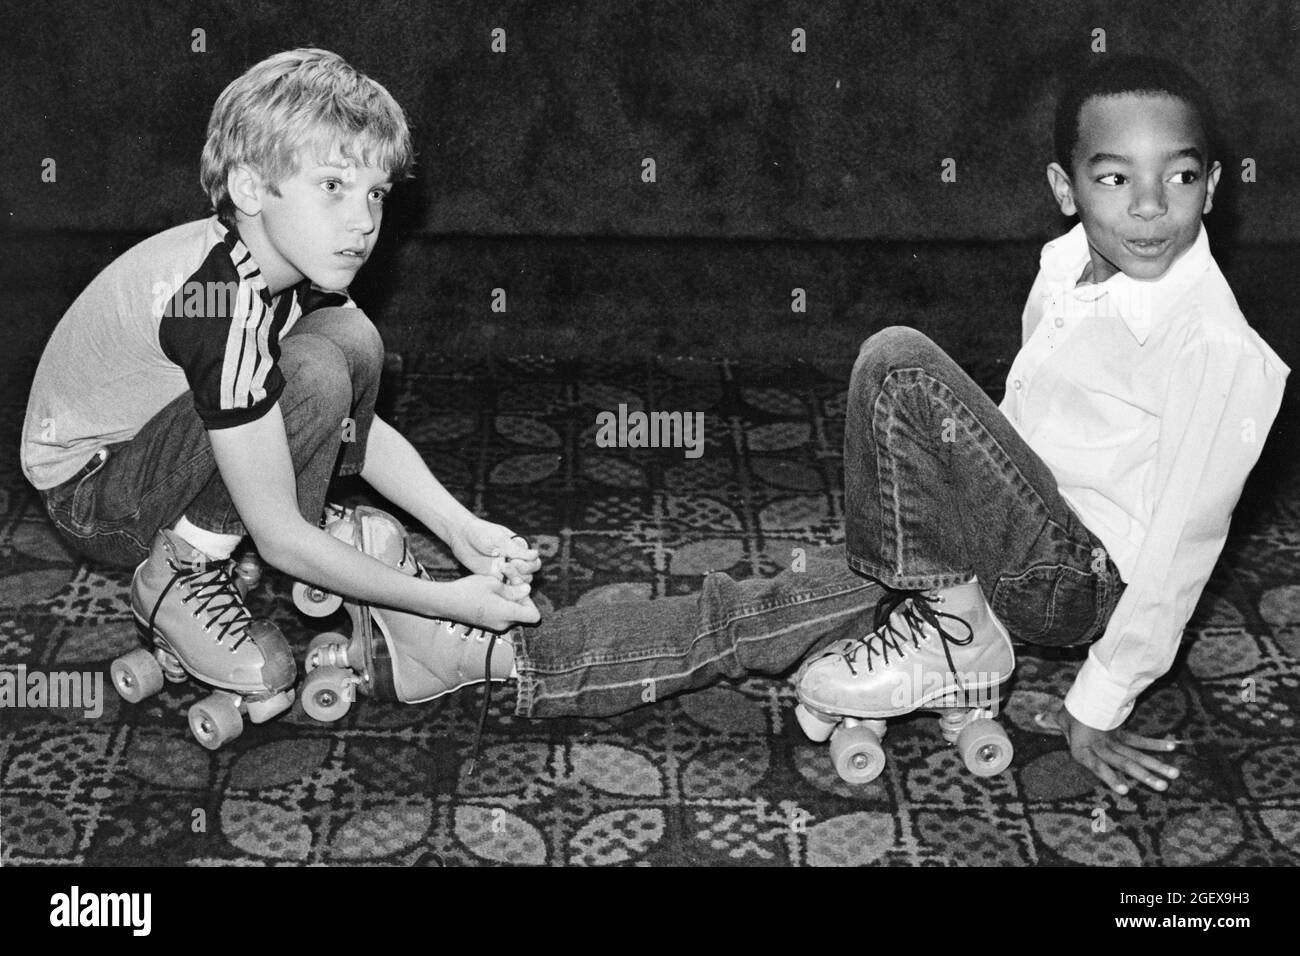 Luling Texas USA, circa 1988: Young white boy ties laces of his Black friend's skating boot at roller rink. ©Bob Daemmrich Stock Photo